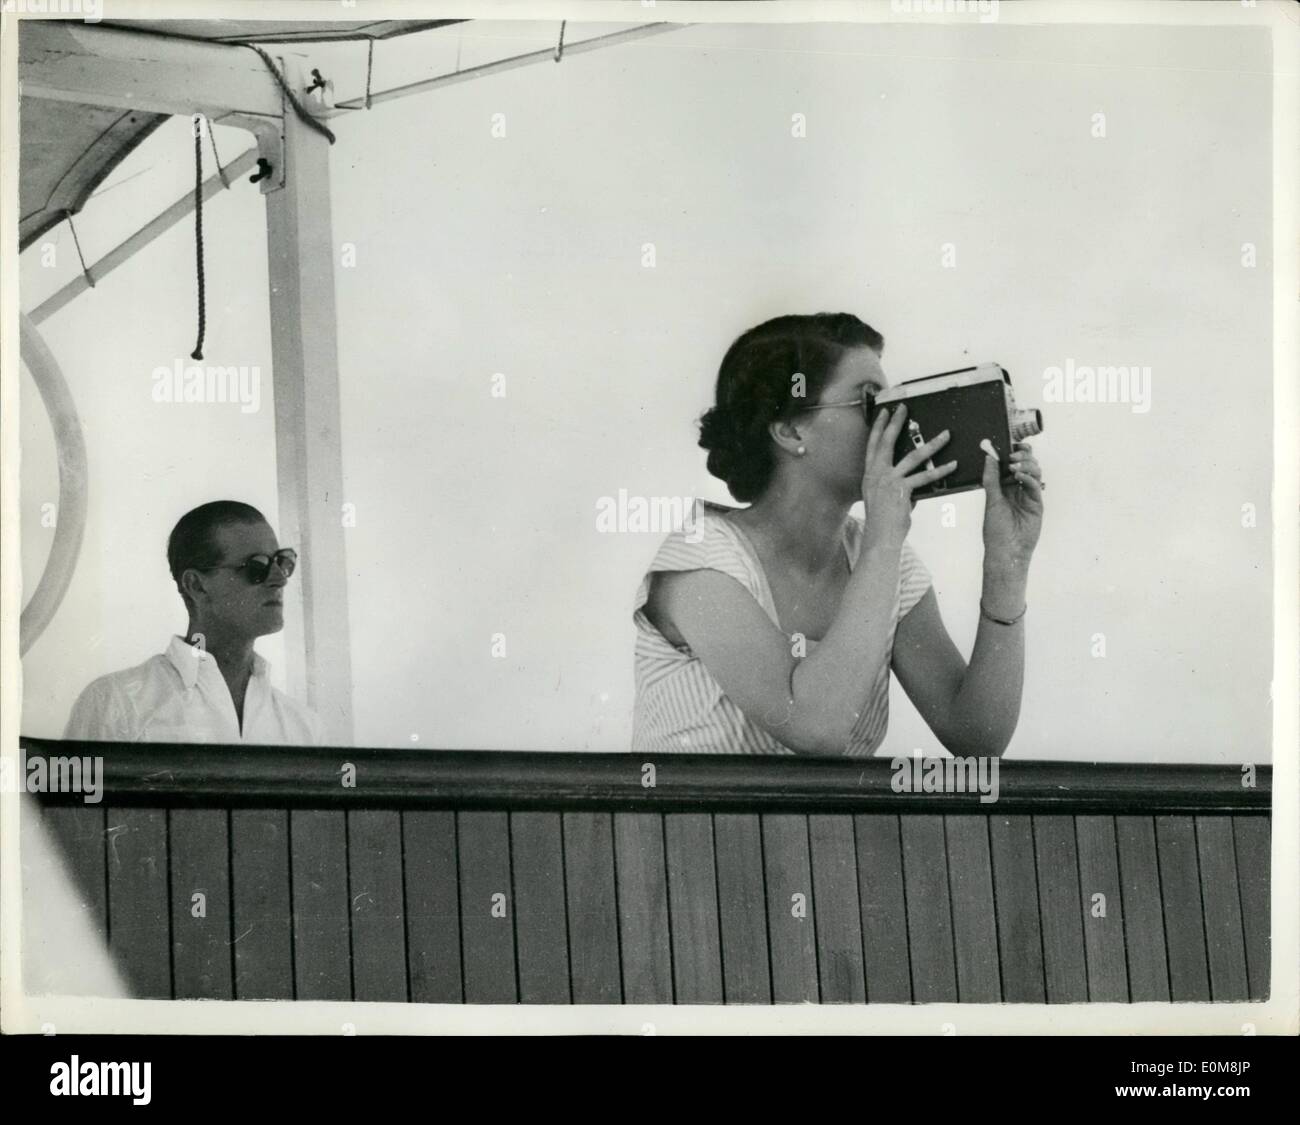 Dec. 12, 1953 - Royal Tour - Original picture.: The H.M.N.Z.S. Black Prince took over escorts duty to the royal tour liner ''Gothic'', in the Pacific, when H.M. The Queen and The Duke of Edinburgh were enroute for Suva. H.M. The Queen trains her cine camera on the New Zealand light cruiser Black Prince as the warship took over escort duty. Stock Photo